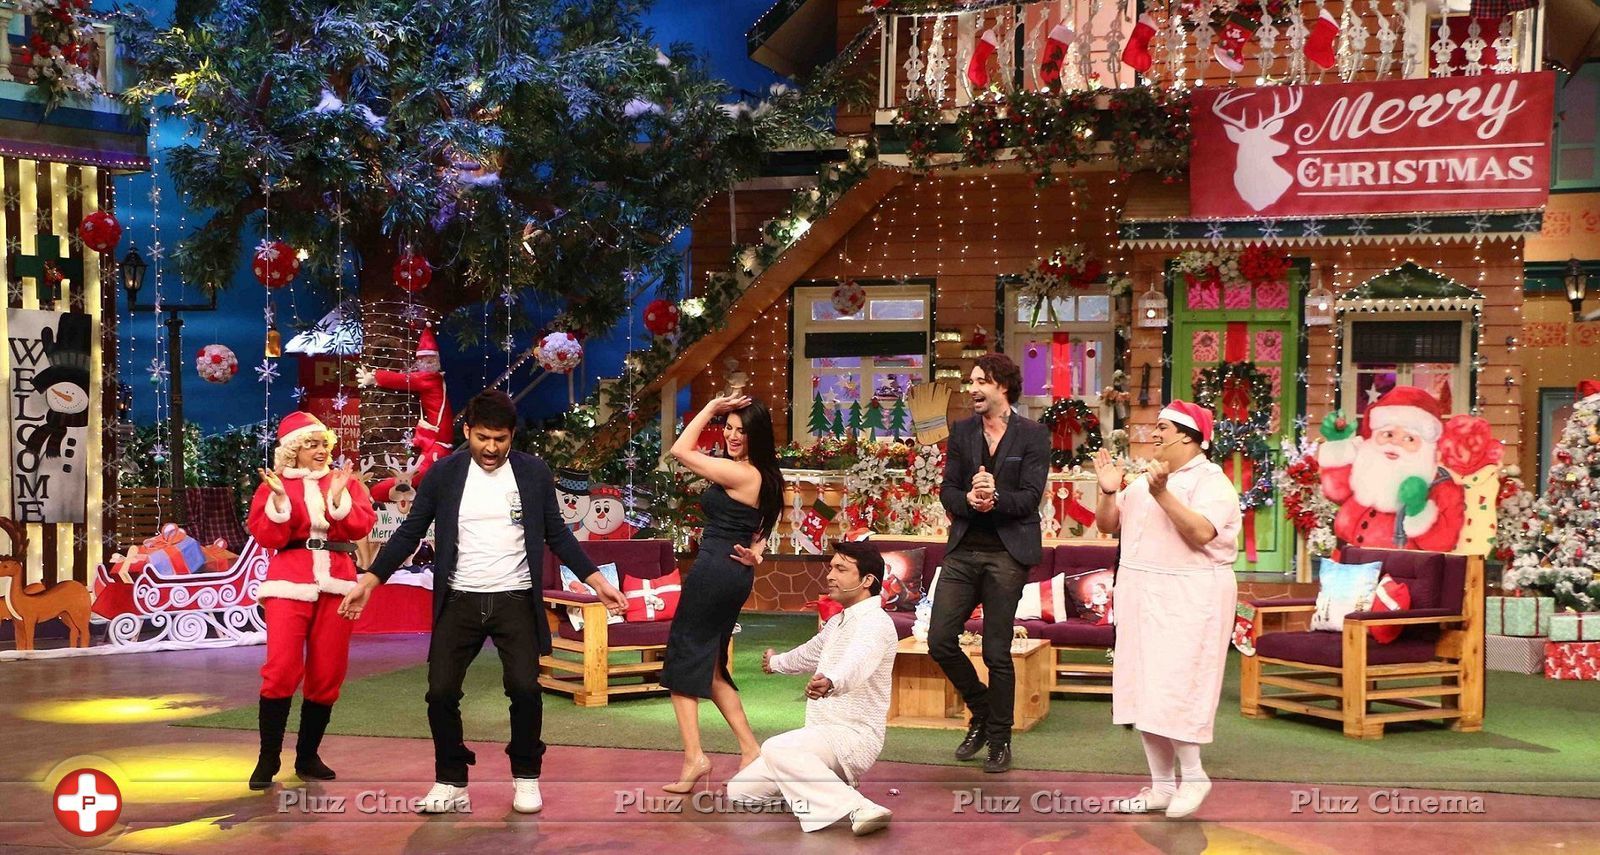 Sunny Leone on the sets of The Kapil Sharma Show Pictures | Picture 1453112